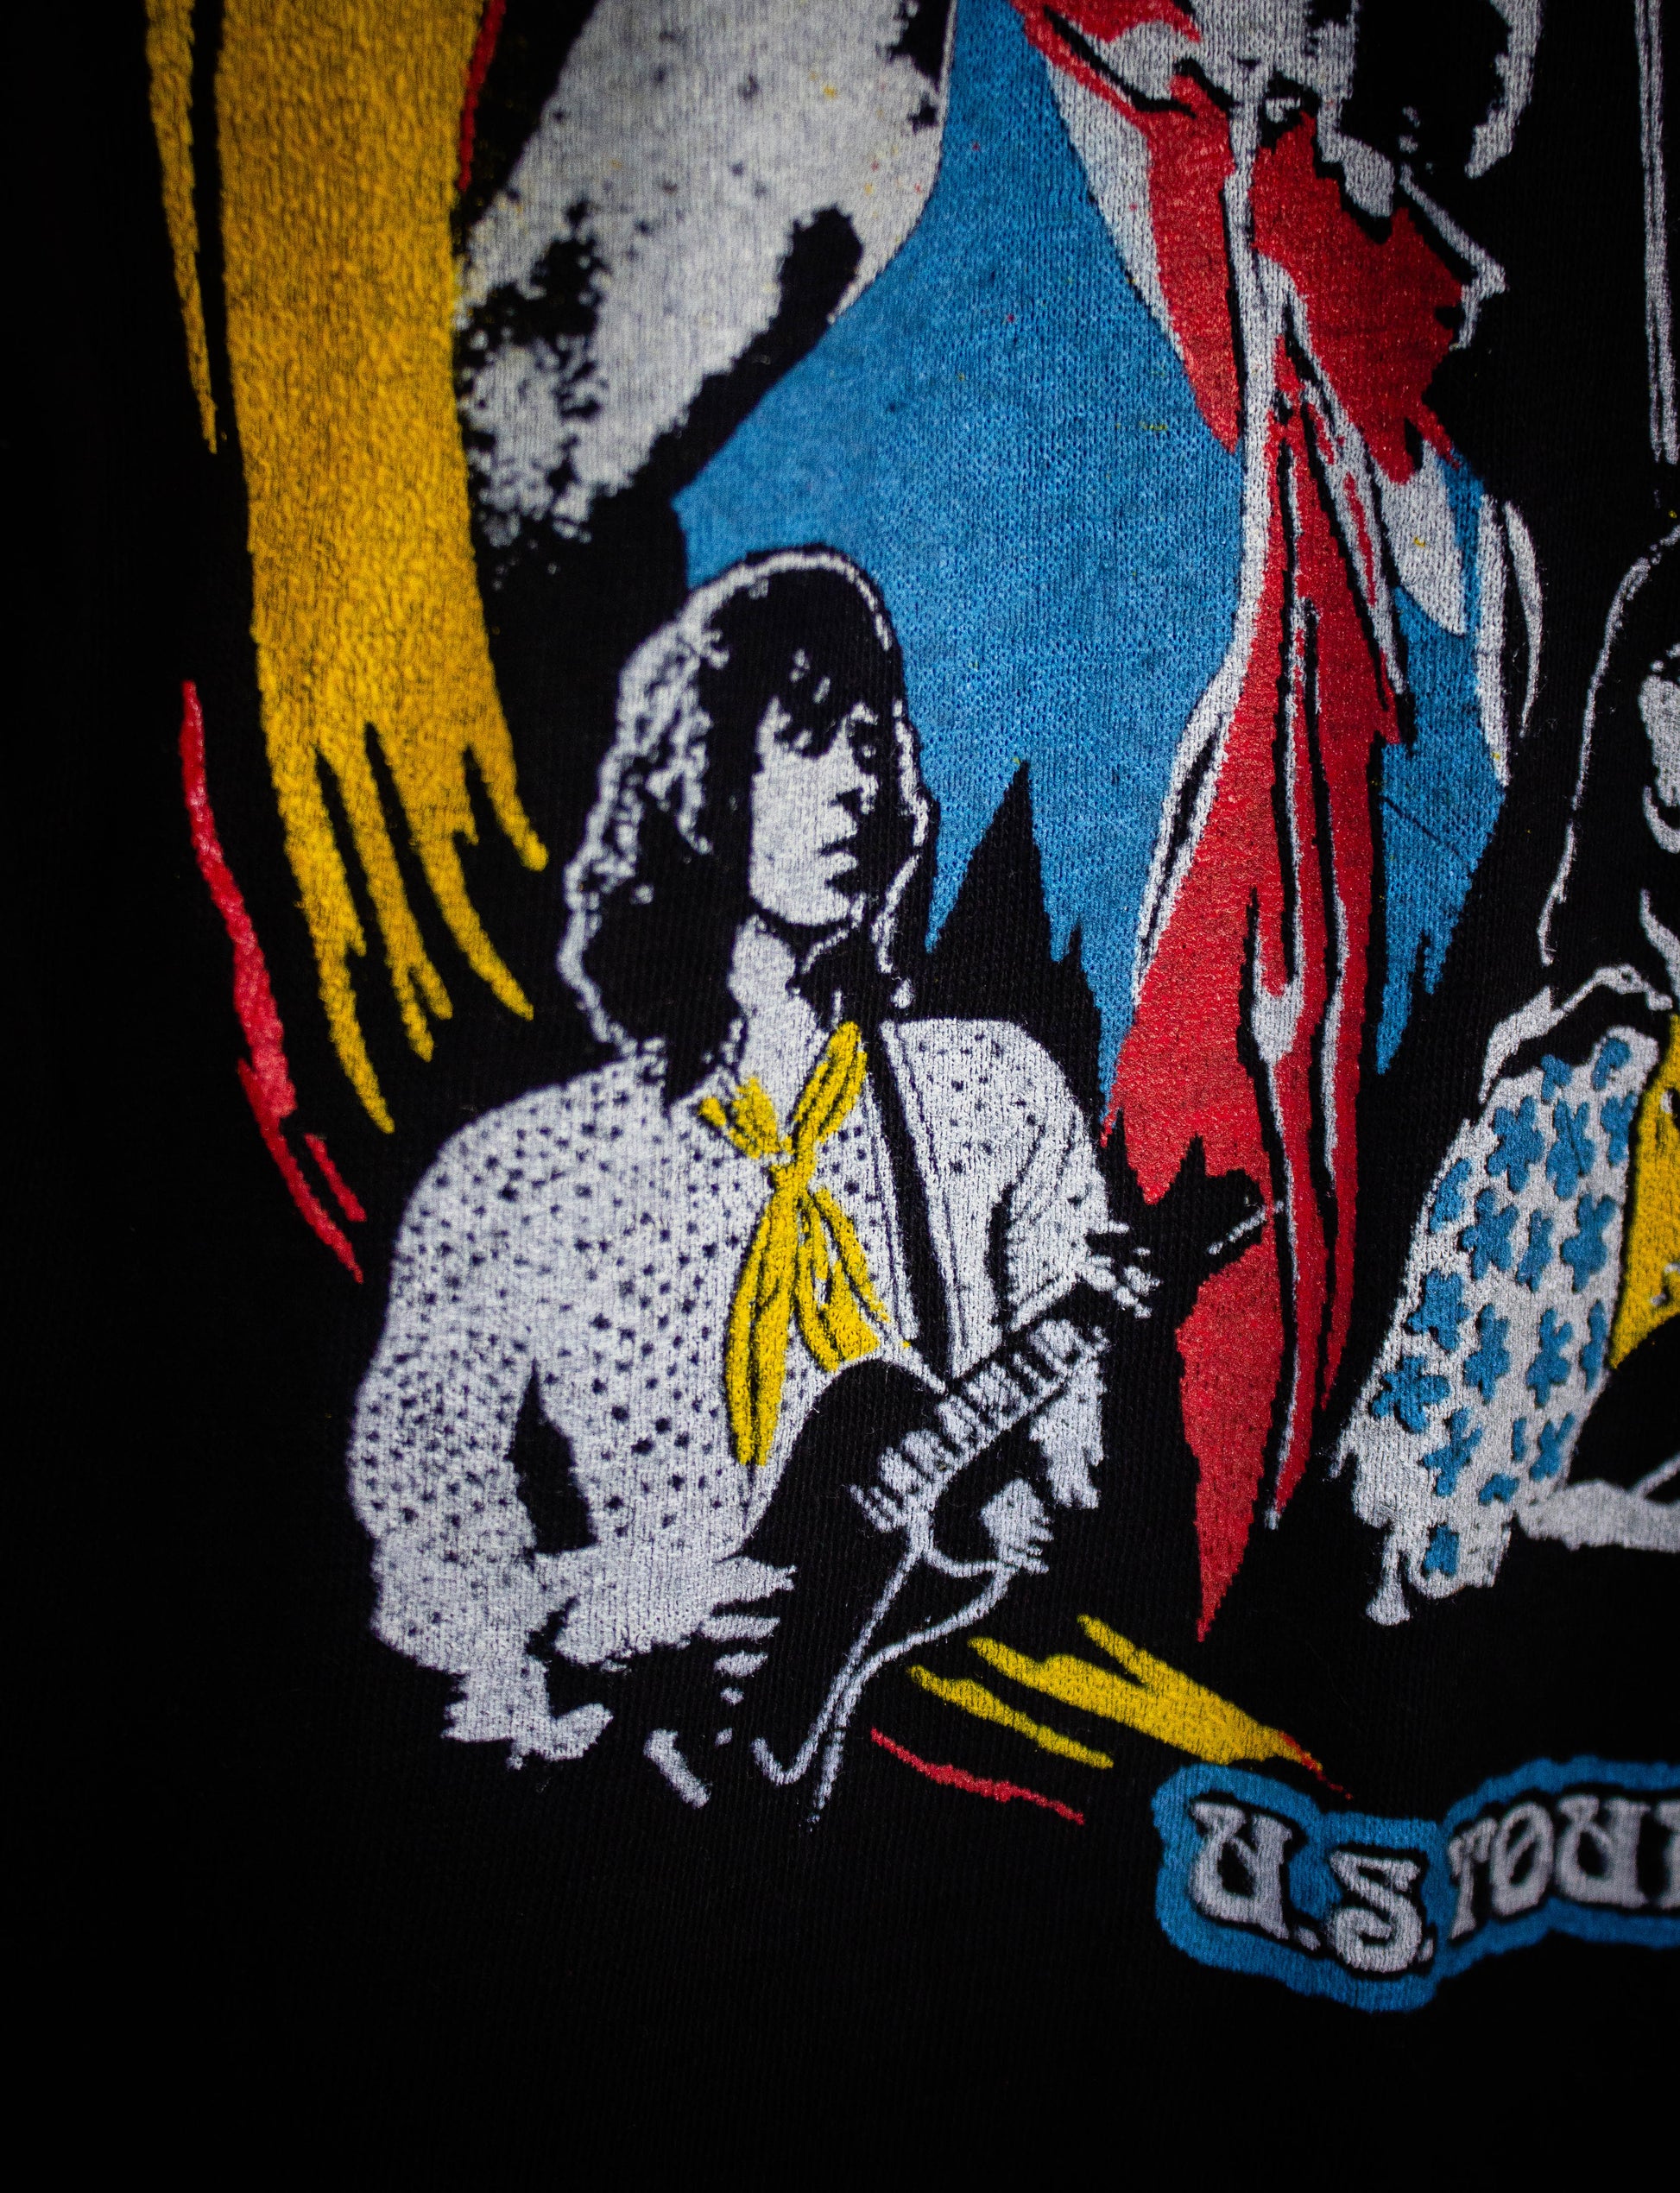 Vintage 1975 Rolling Stones In Concert T Shirt Black Small